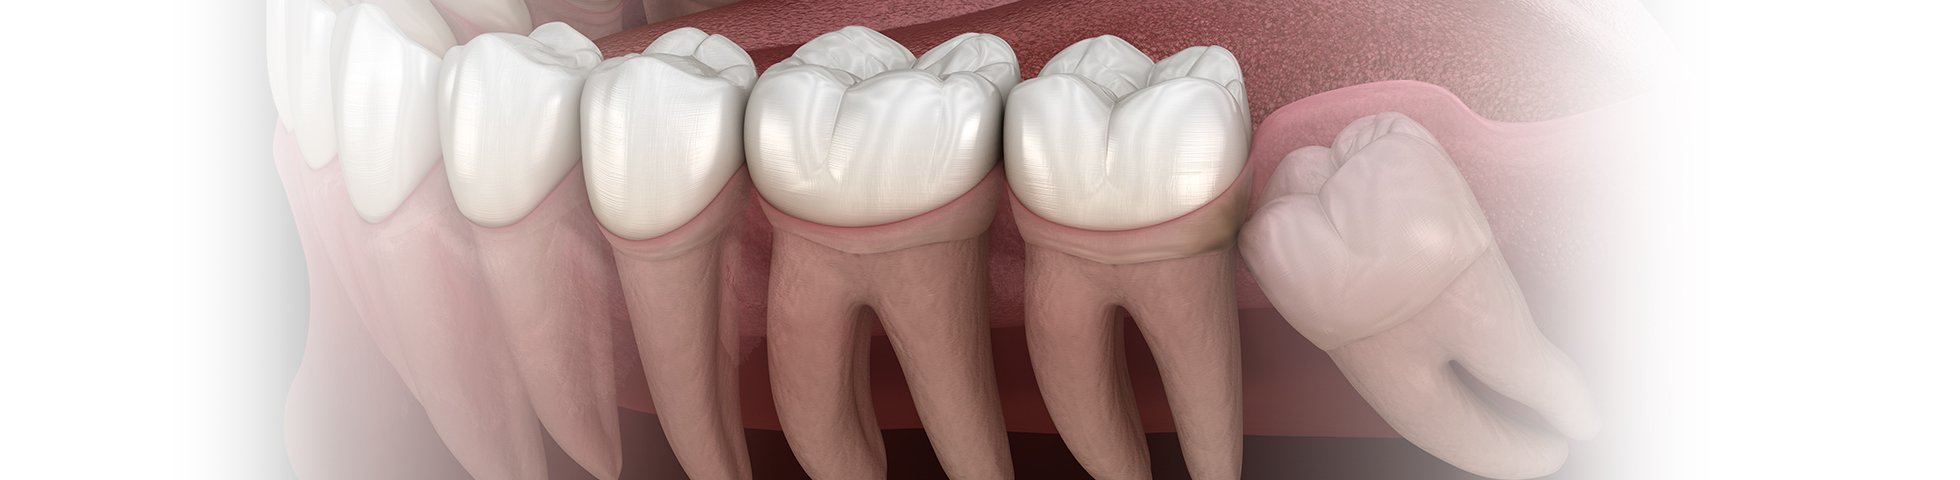 Wisdom tooth extraction from the dentist you trust in Fort Worth